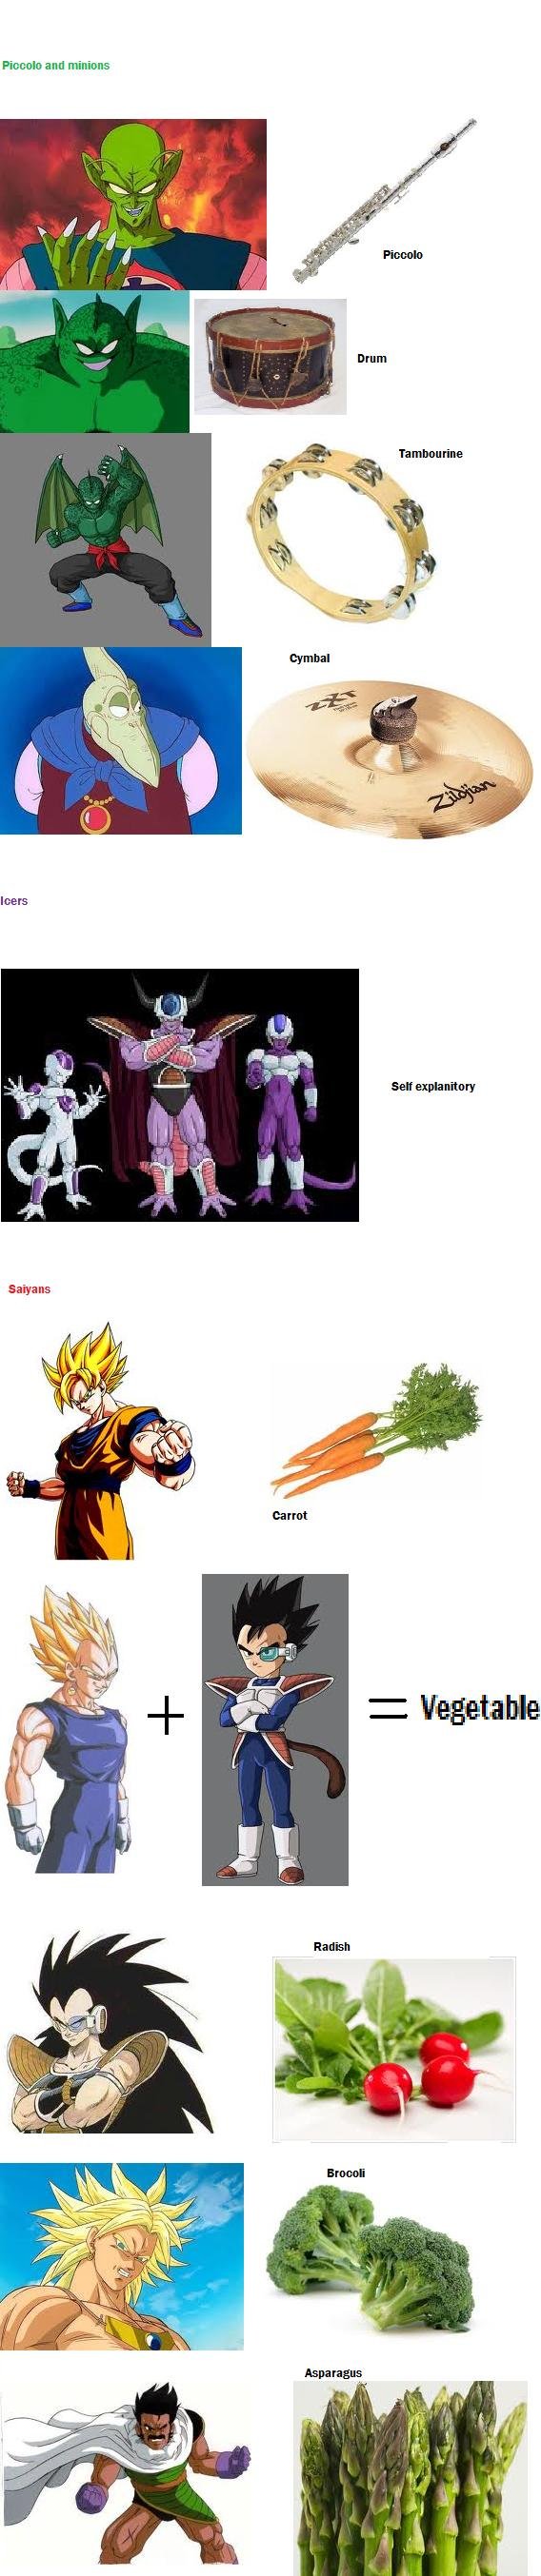 Dragon ball (z) name puns. I know there's more but these are just the more obvious ones. and minions mars Self amnion Sam] us